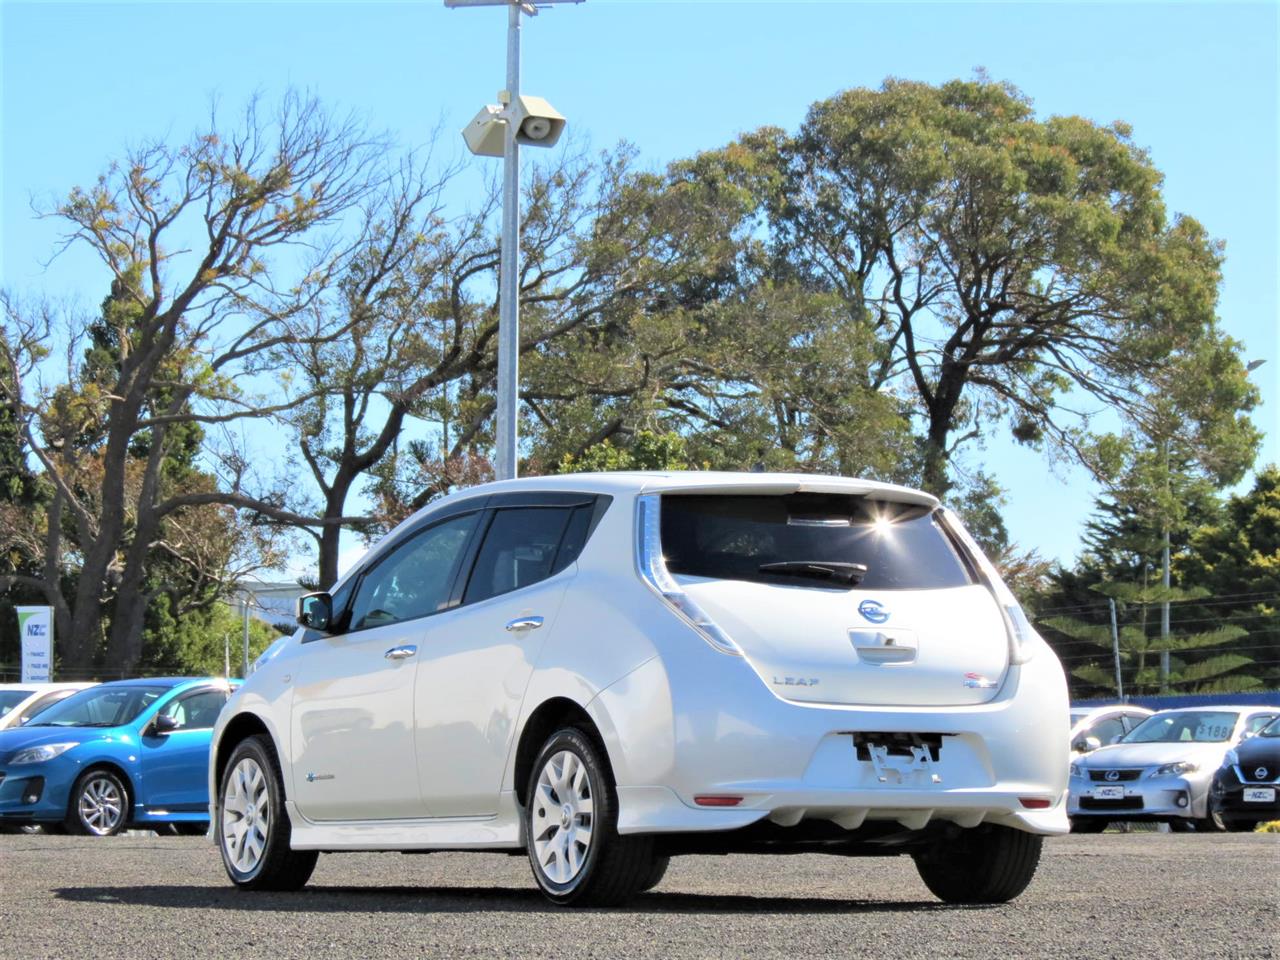 2016 Nissan Leaf only $55 weekly